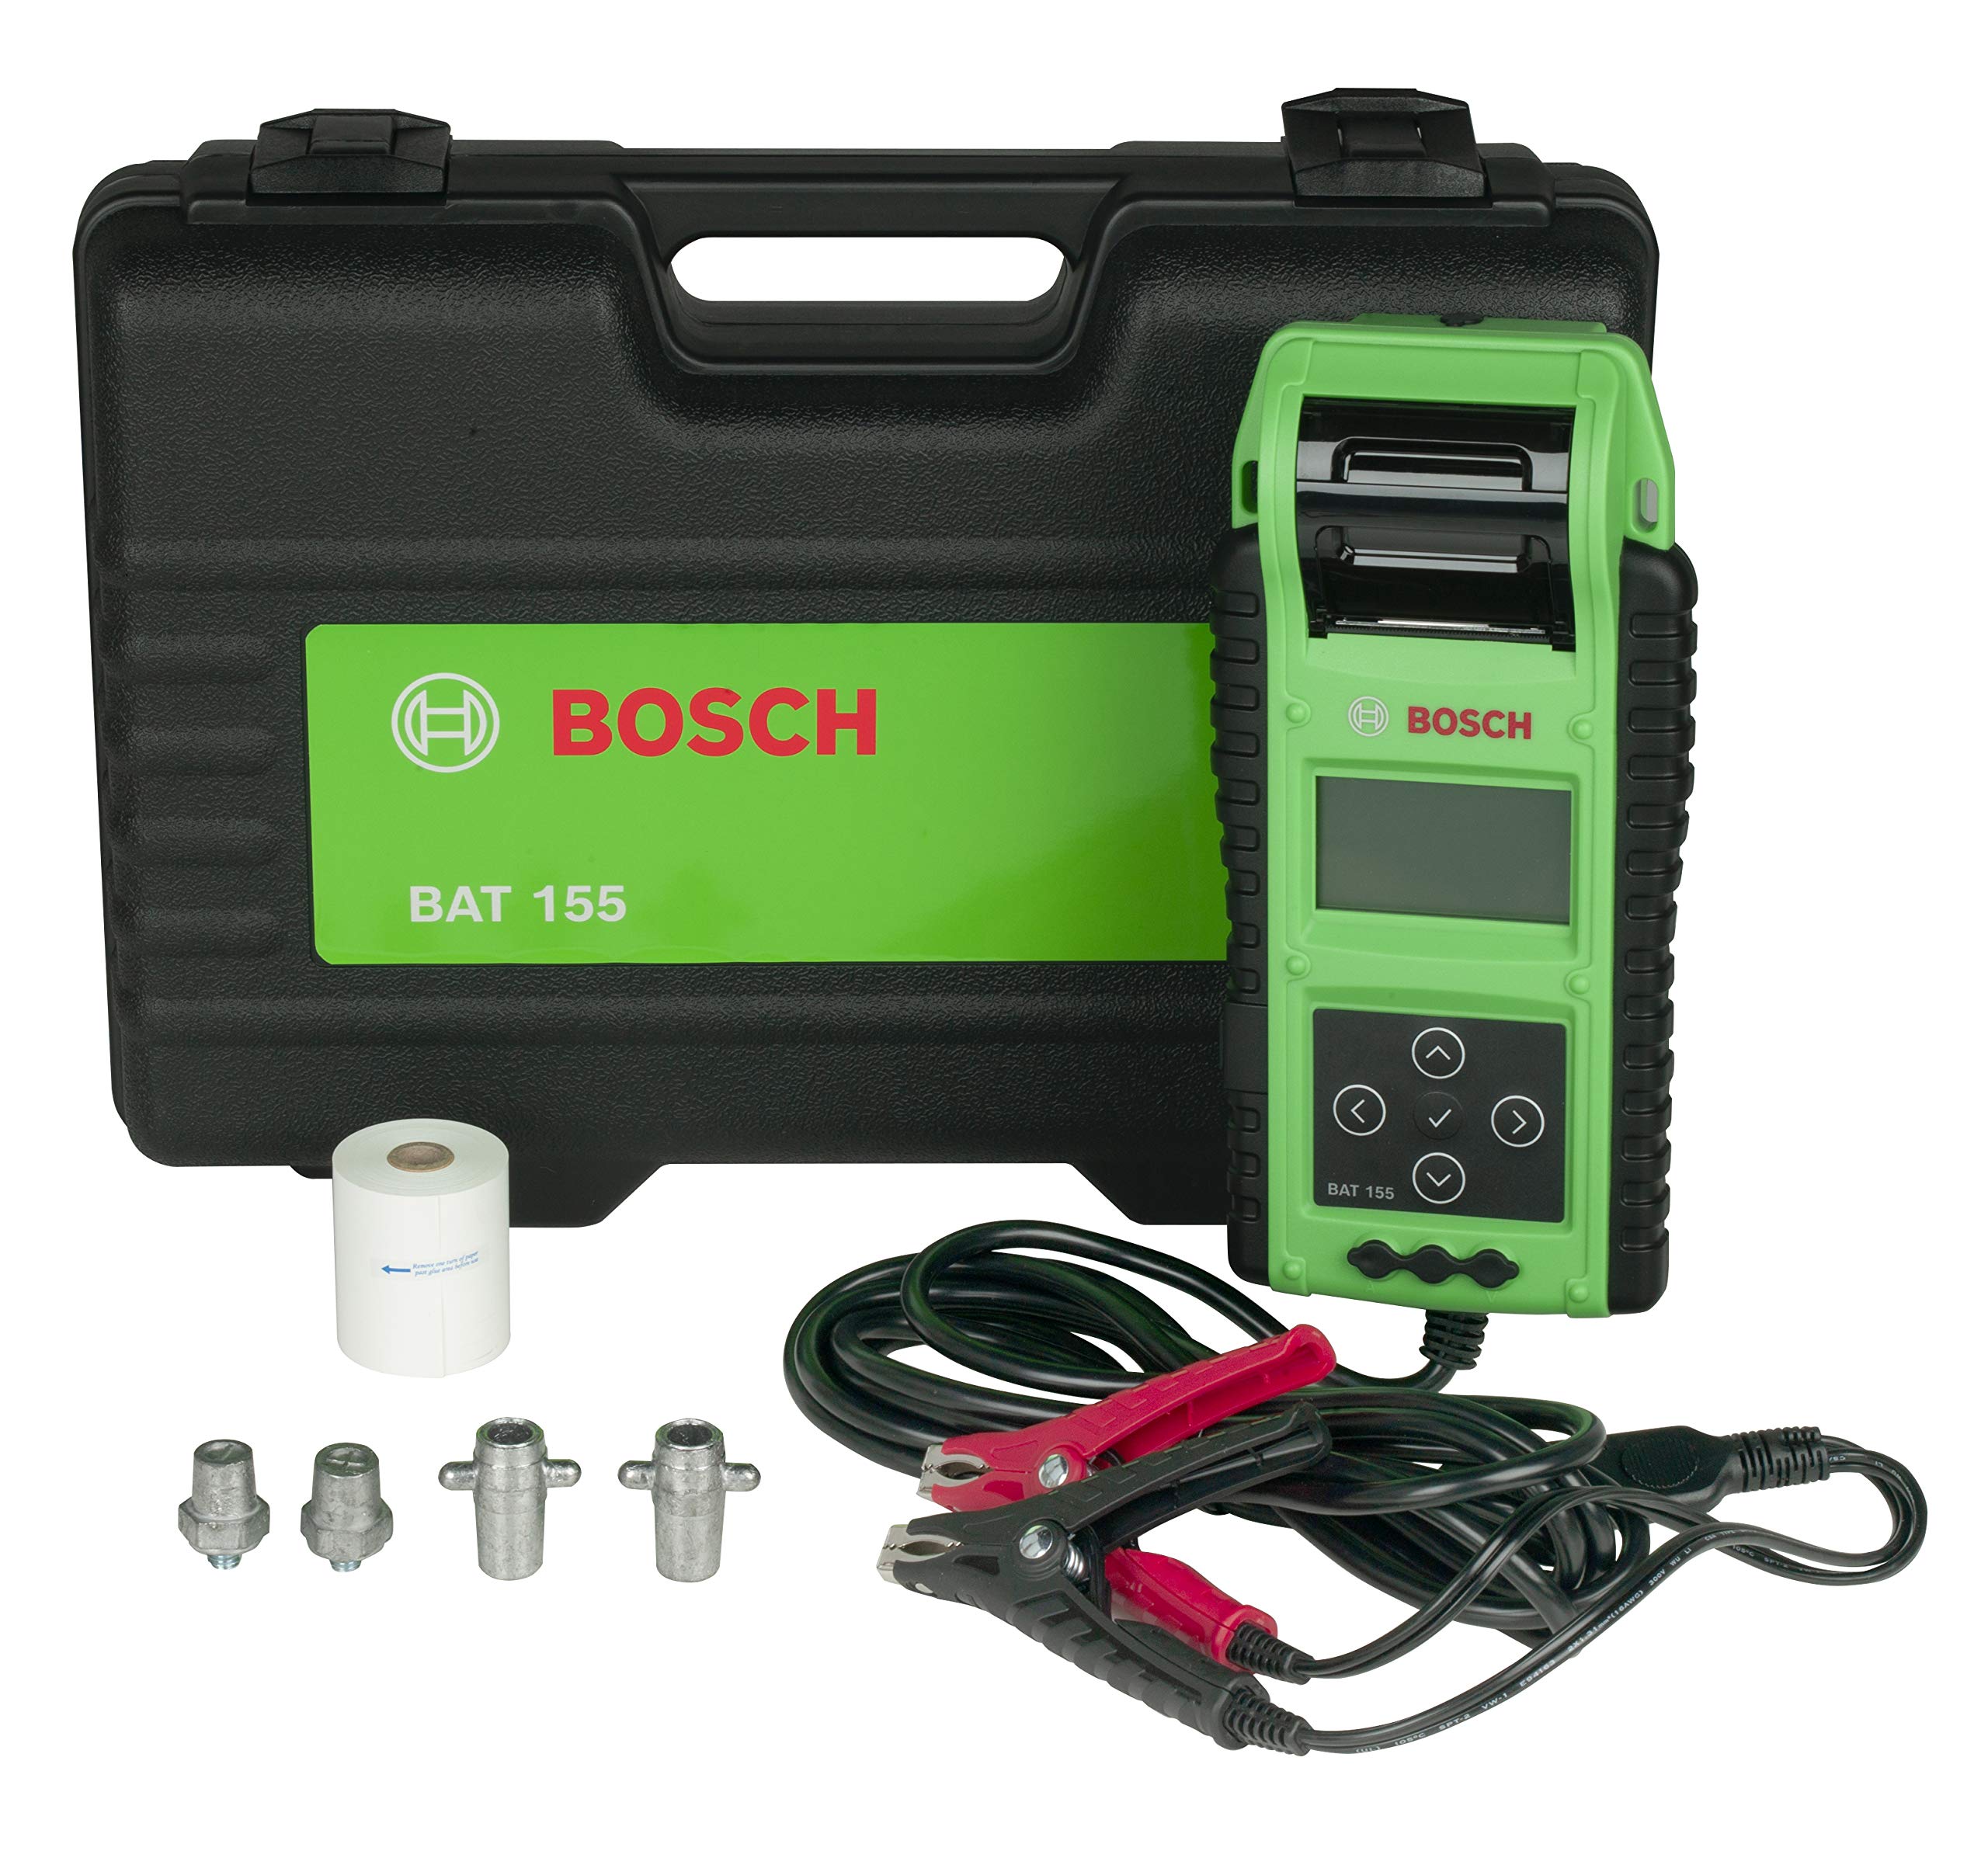 BOSCH BAT155 Heavy Duty Battery Tester with Integrated Printer - Use with 6V and 12V Batteries, 12V and 24V Charging Systems, Large